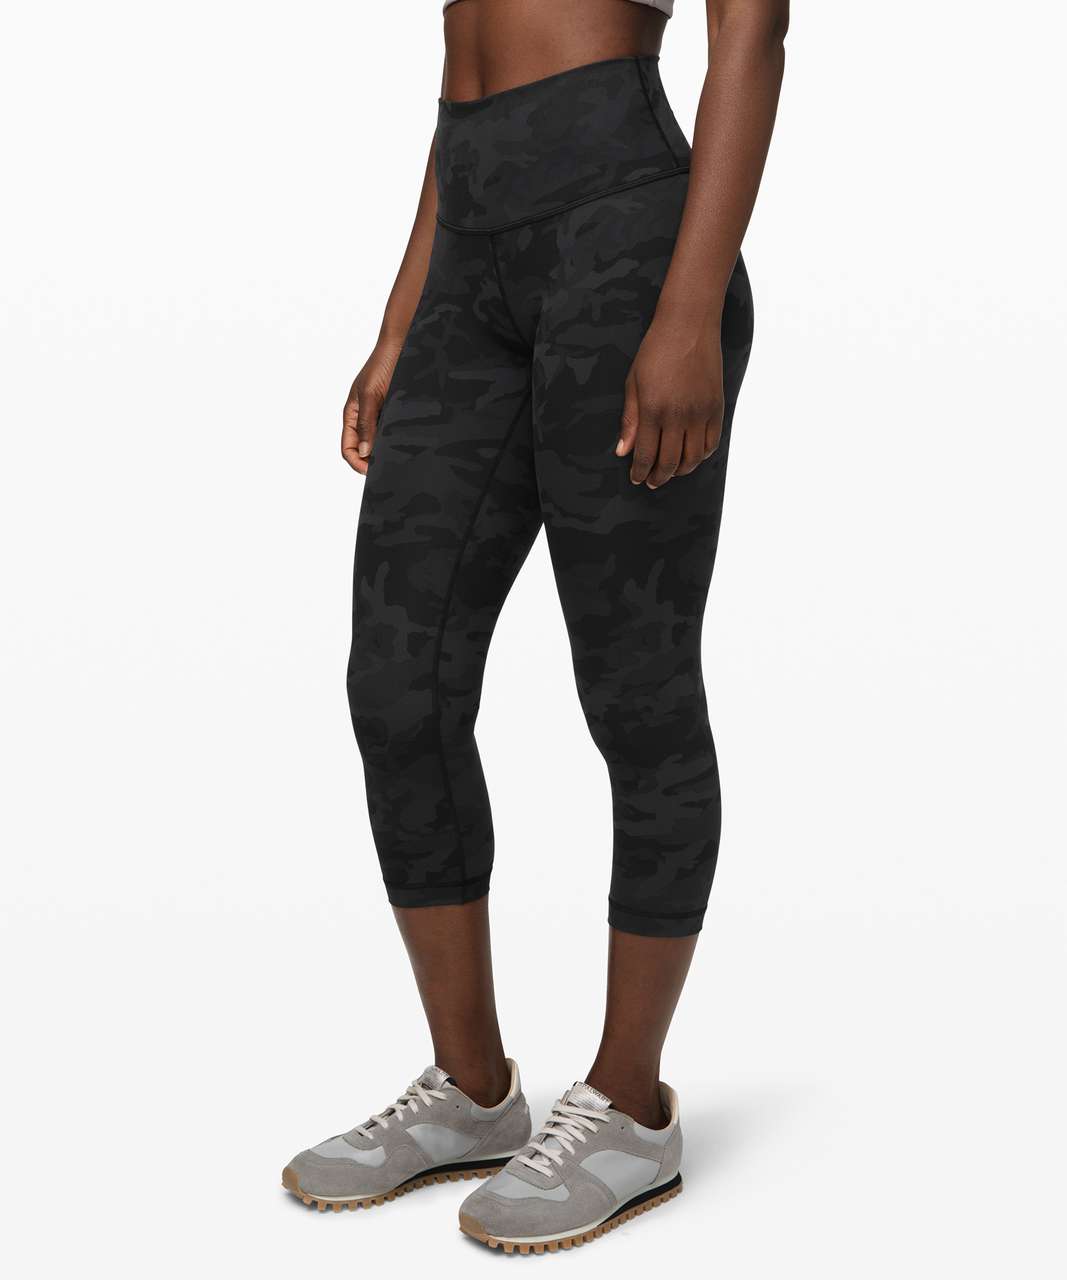 Lululemon Wunder Under Crop (High-Rise) *Full-On Luxtreme 21" - Incognito Camo Multi Grey